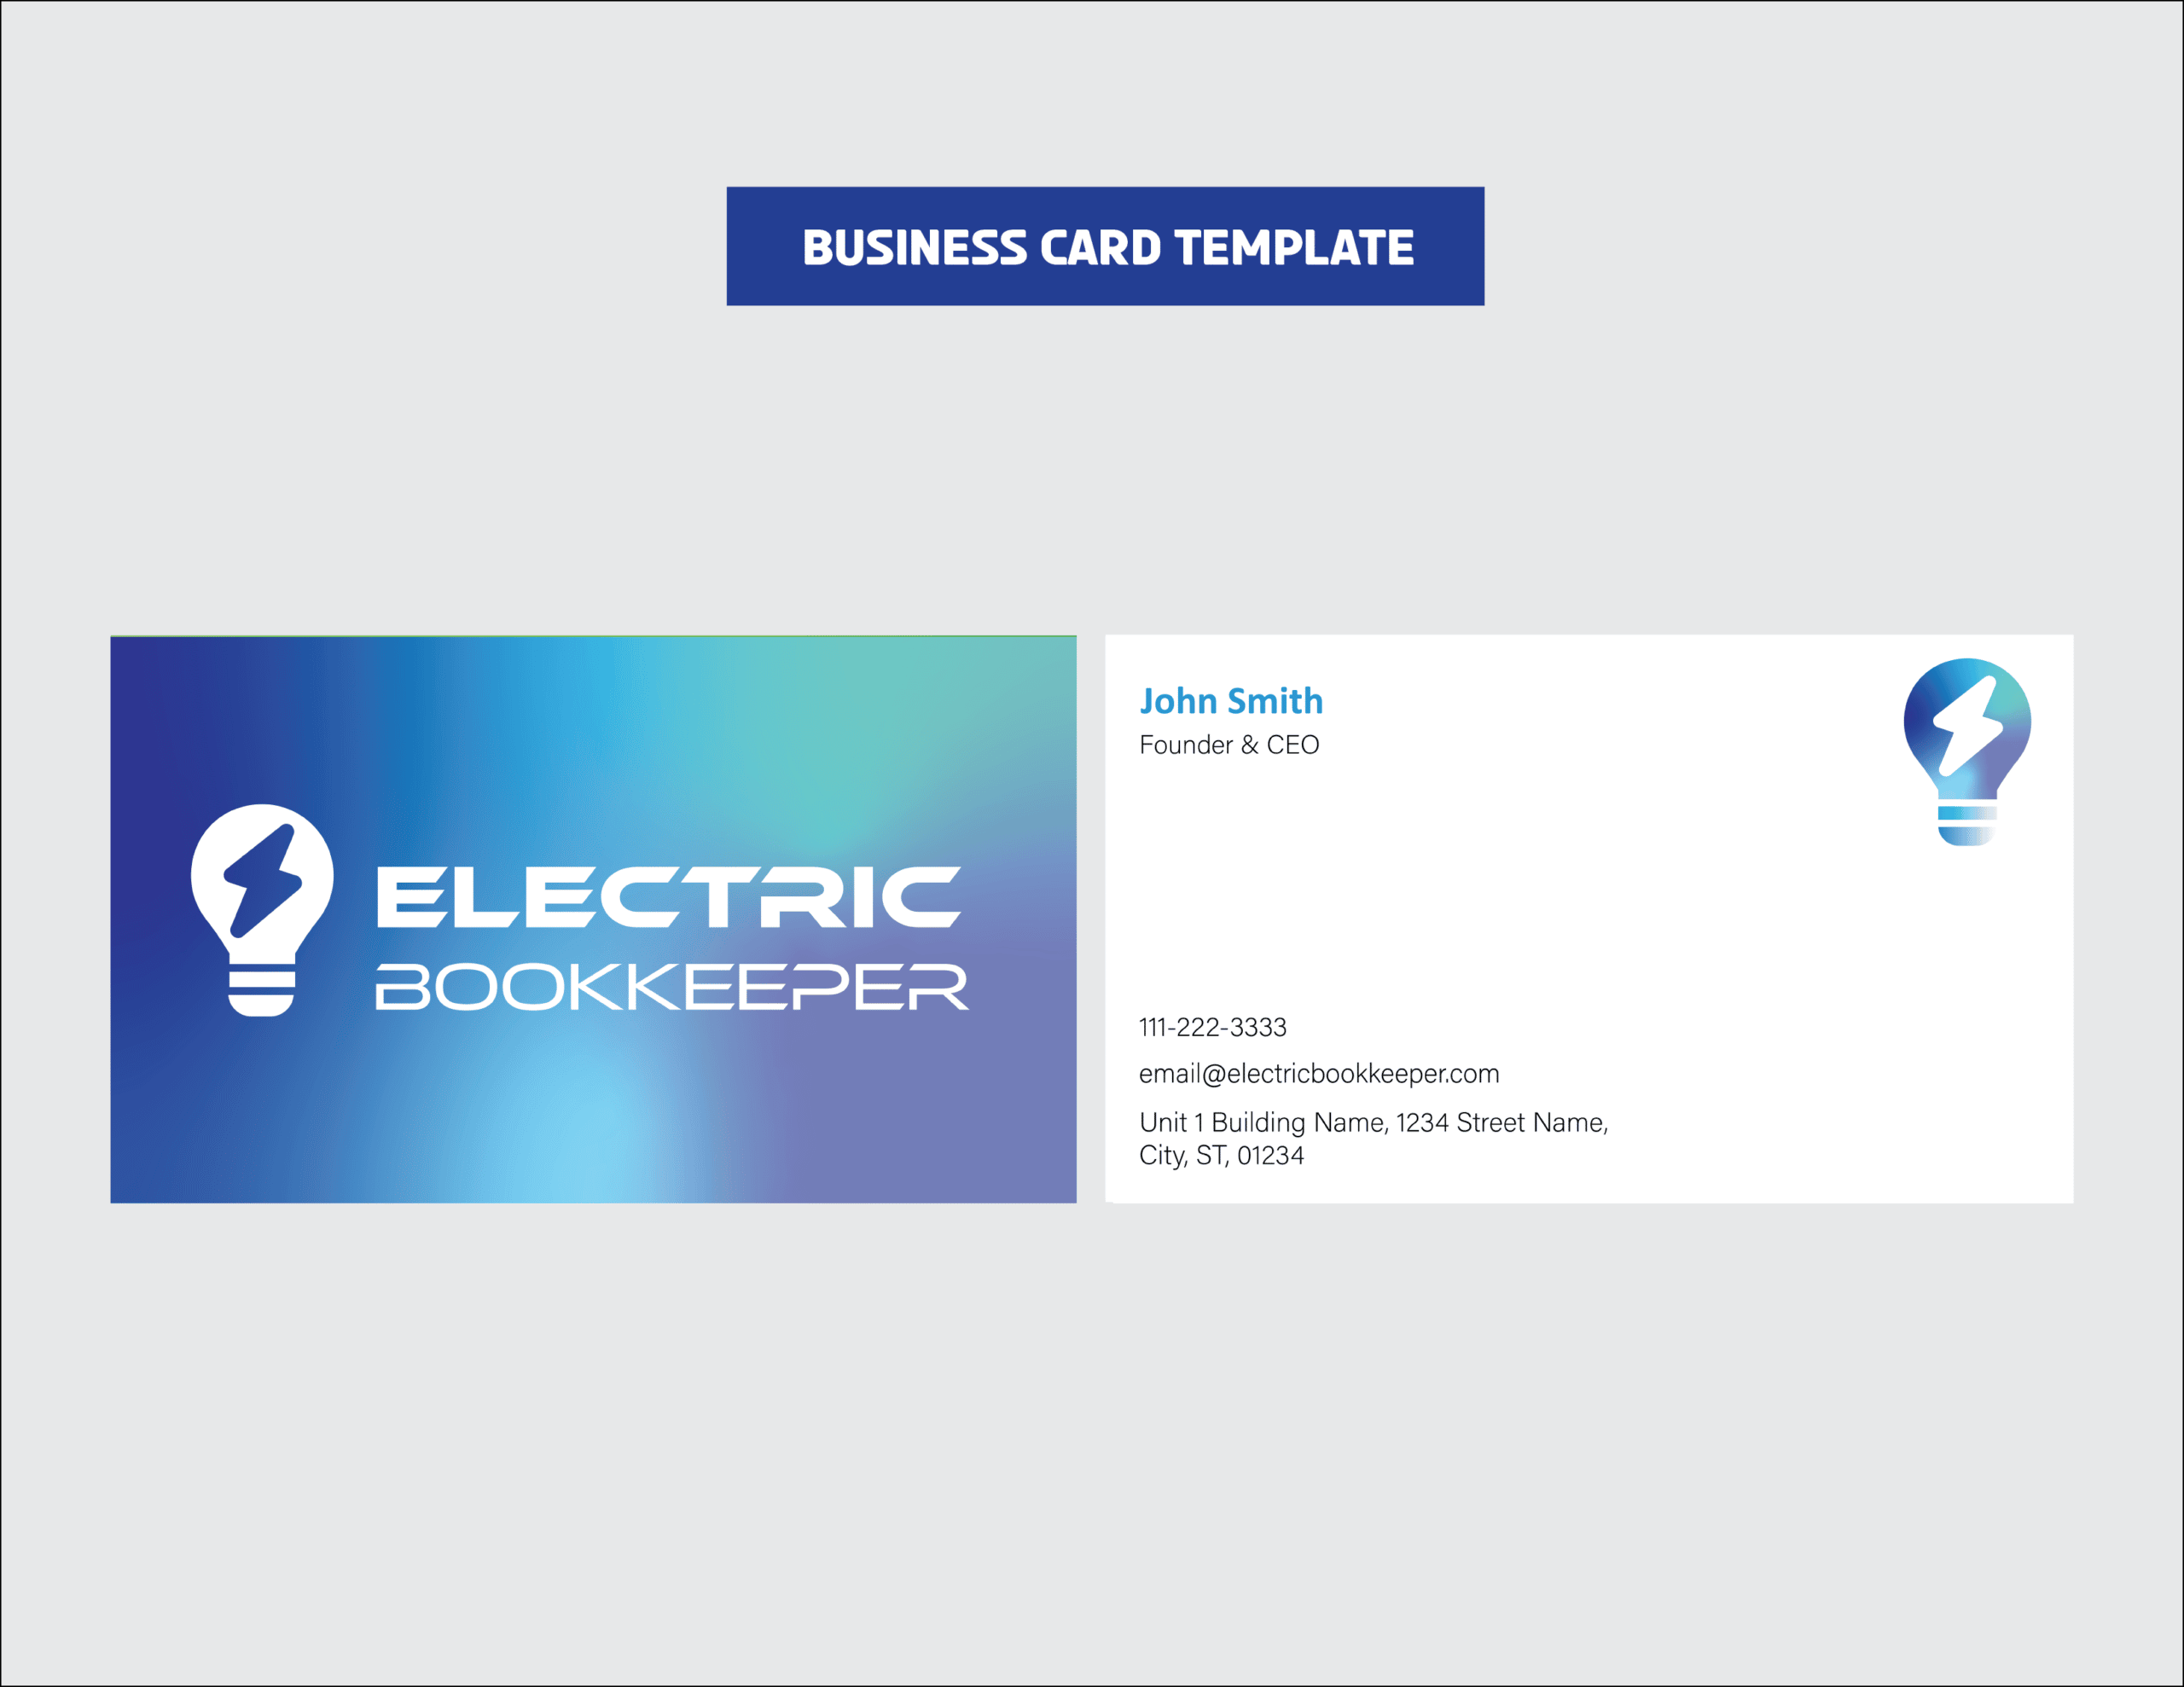 04_ElectricBookkeeper_Business Card Template